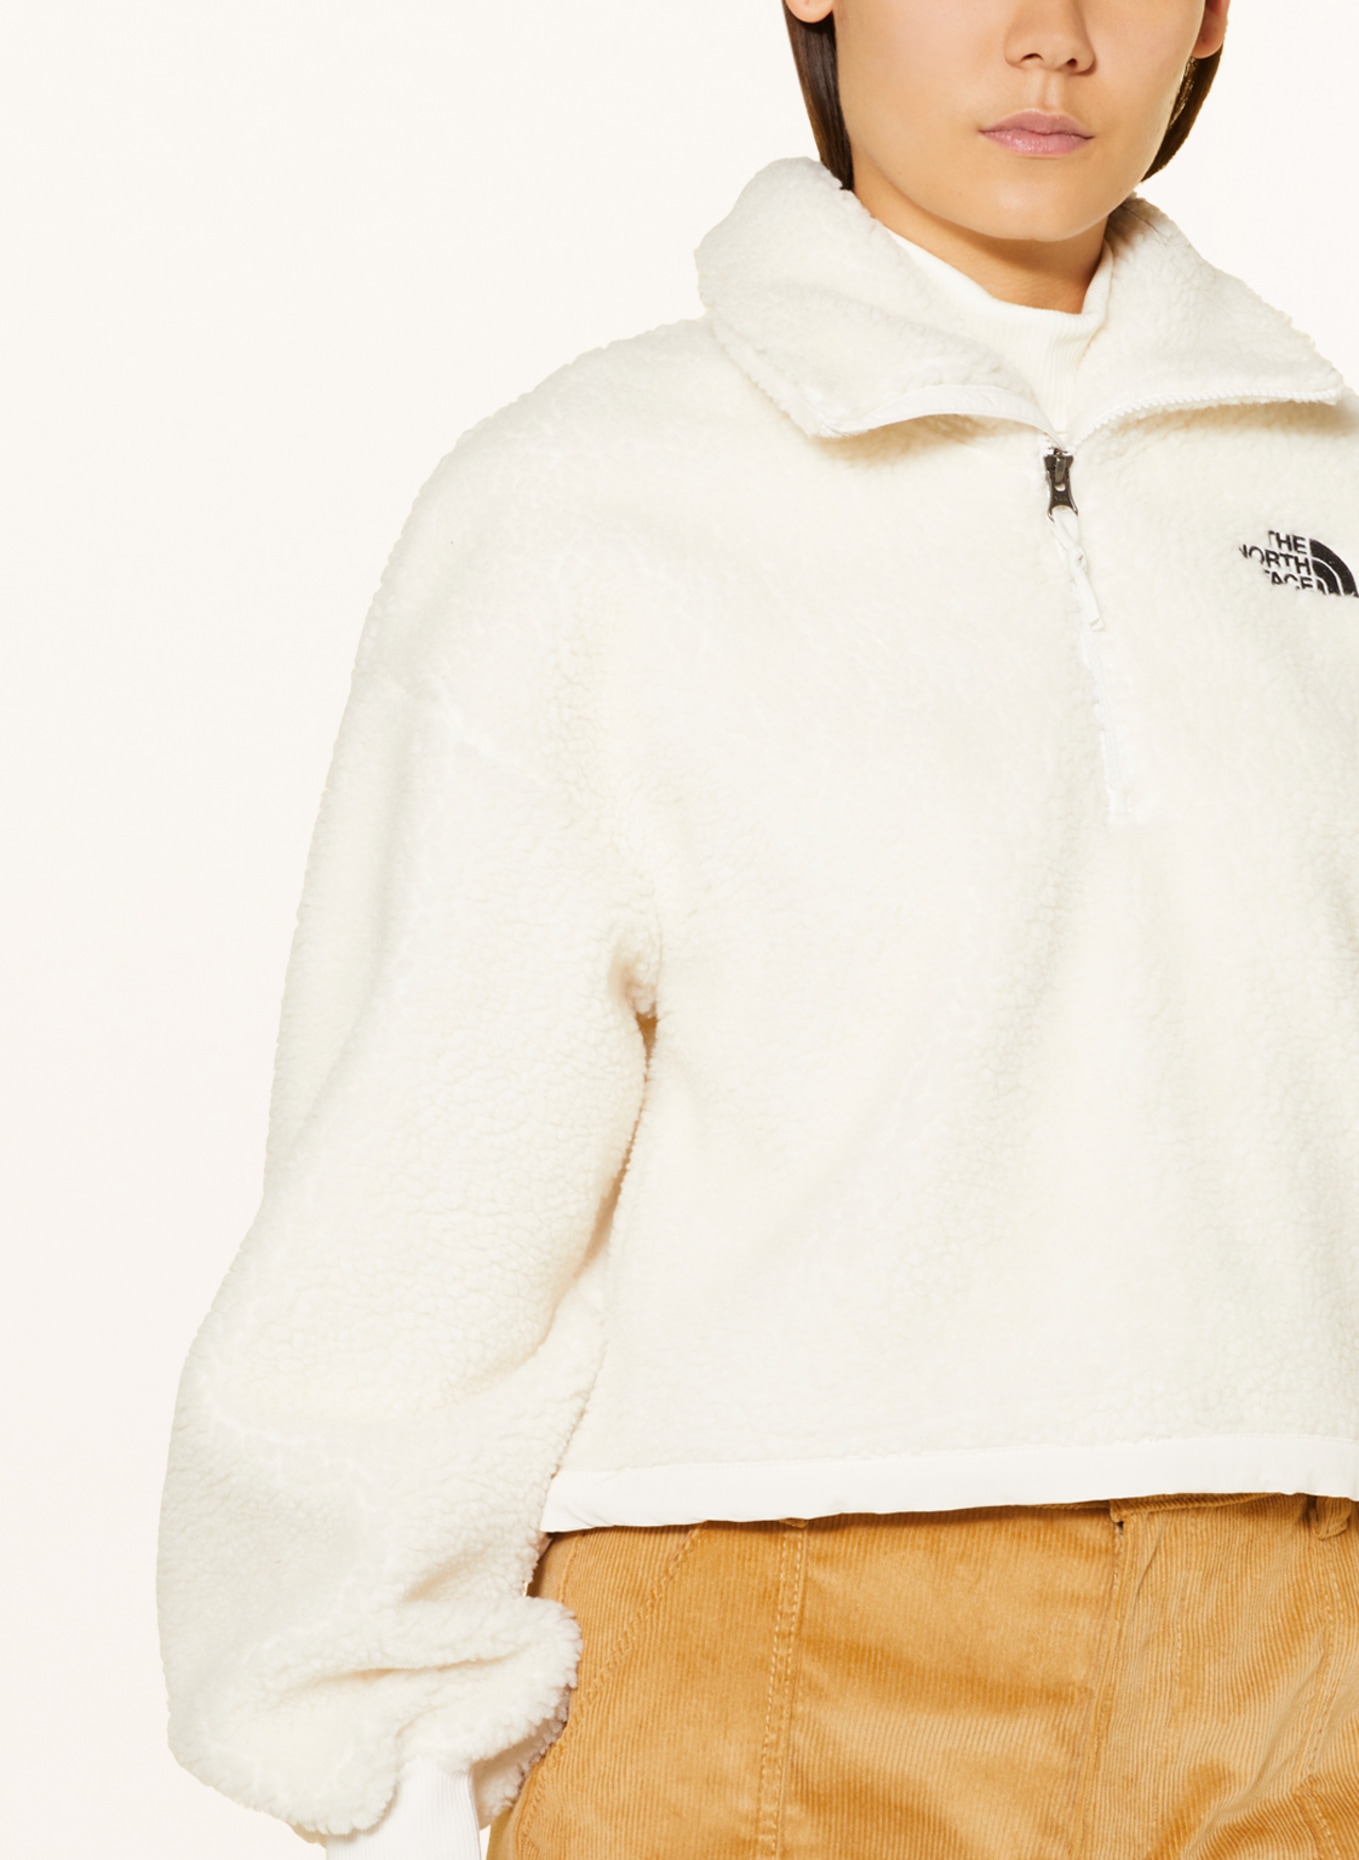 The North Face Sweater Fleece Jacket, Product